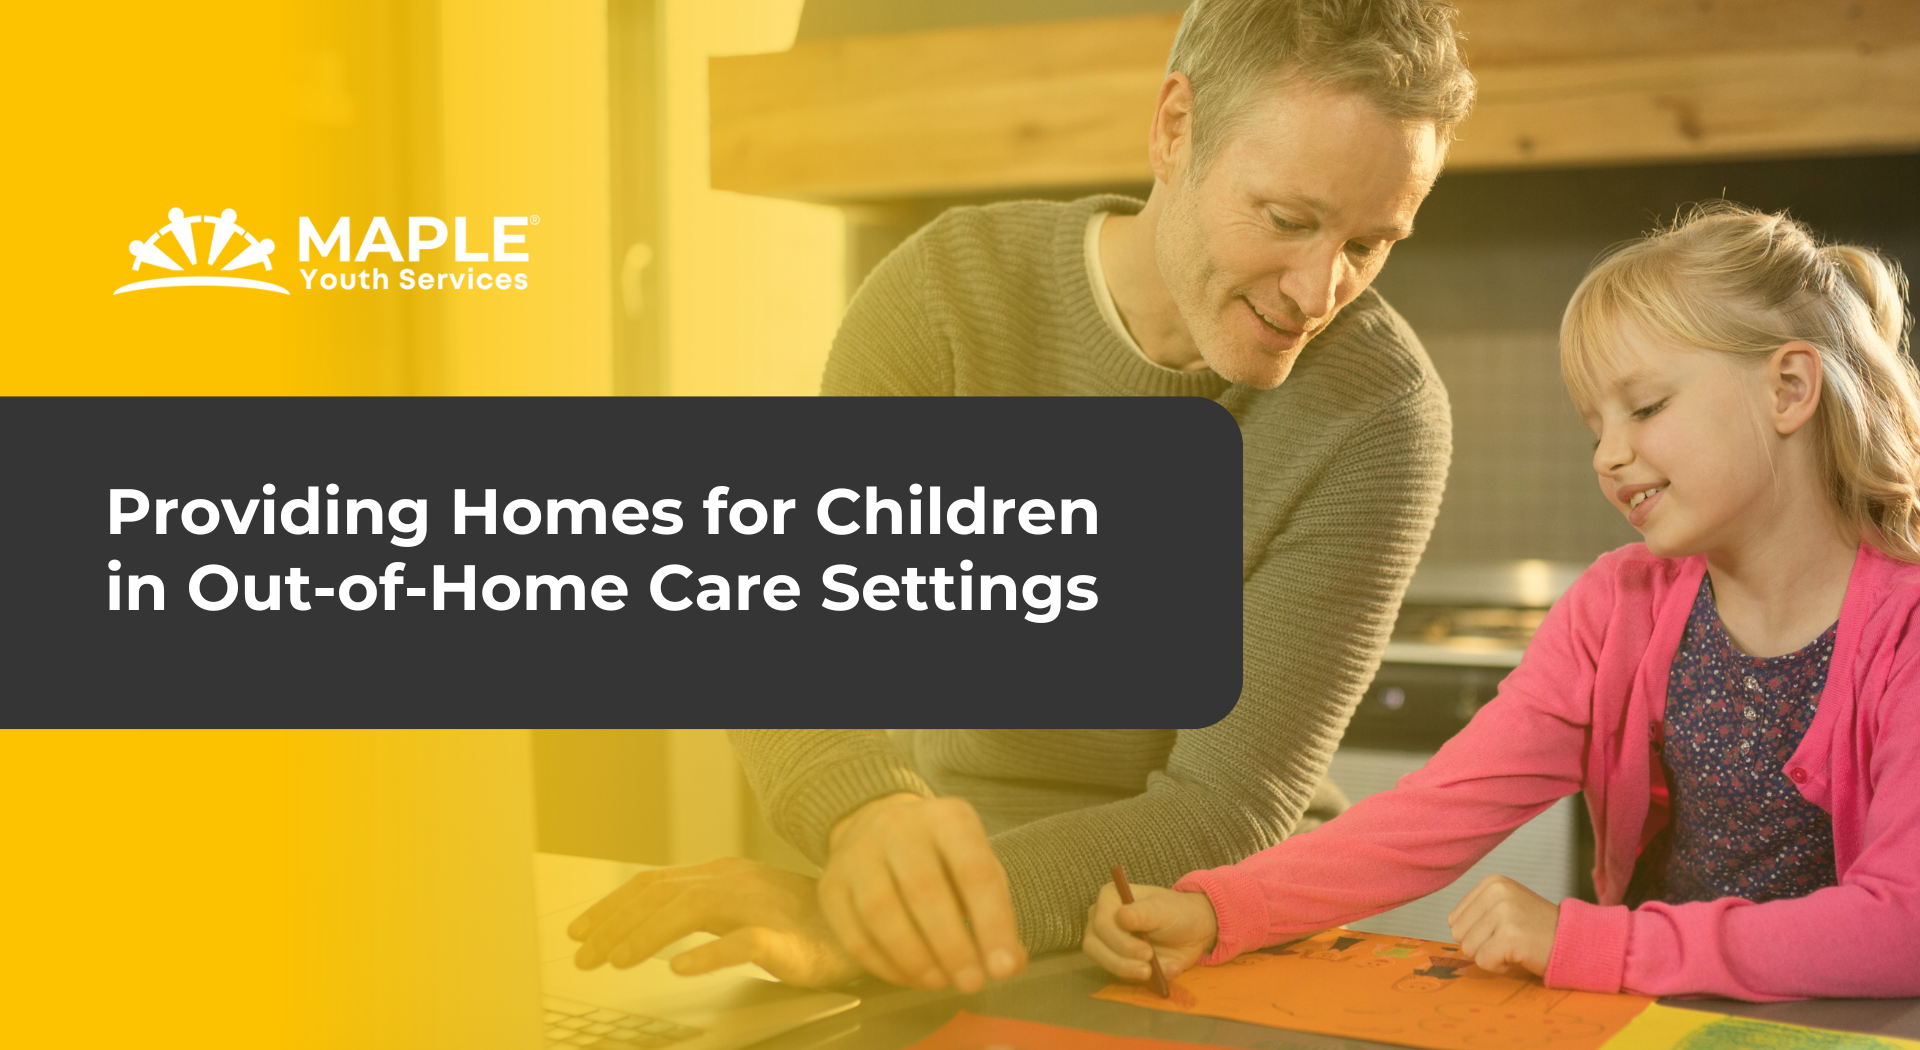 Providing Homes for Children in Out-of-Home Care (OOHC) Settings